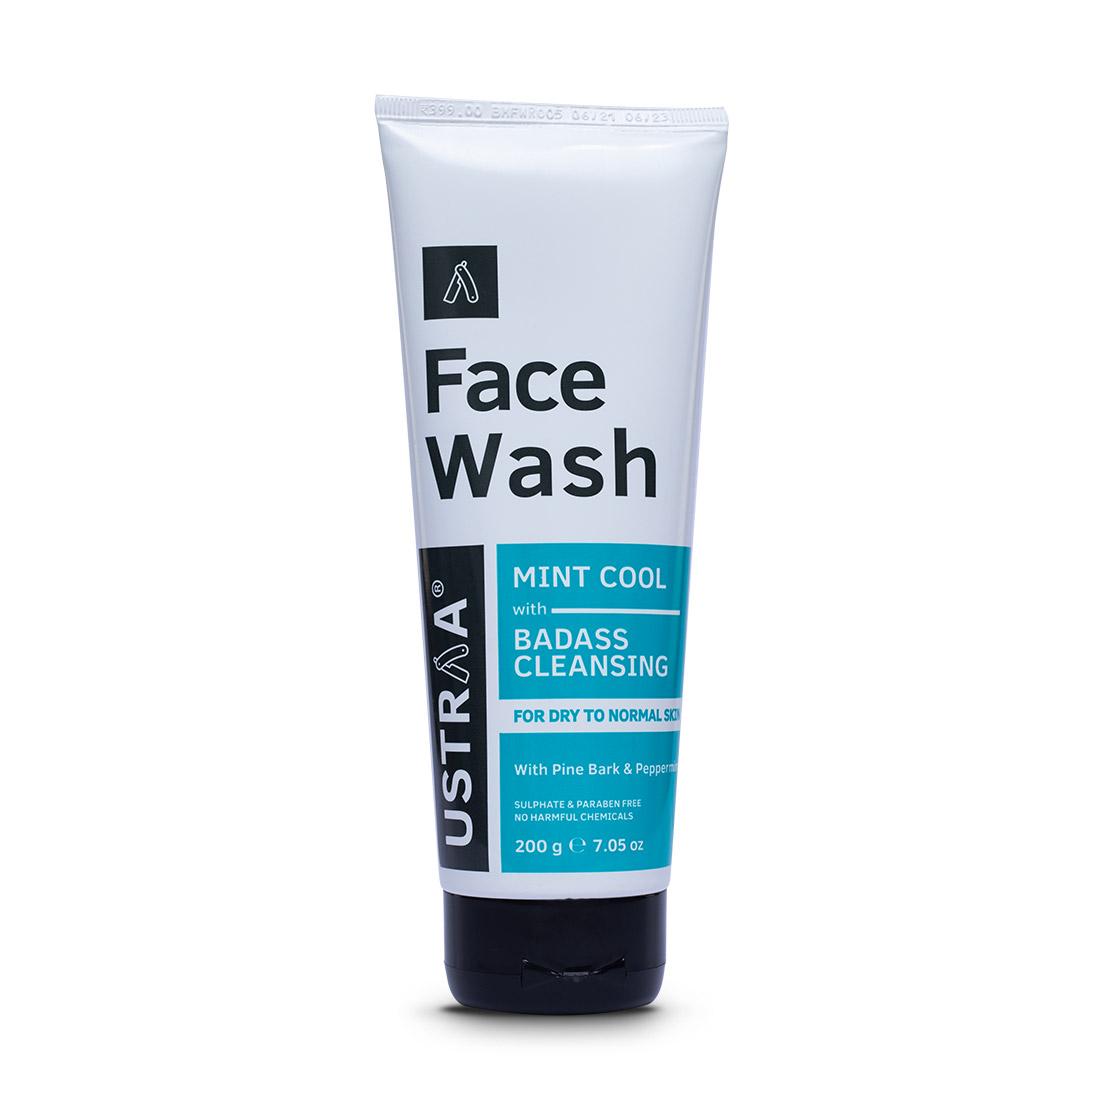 Face Wash - Dry Skin (Mint Cool) - 200g